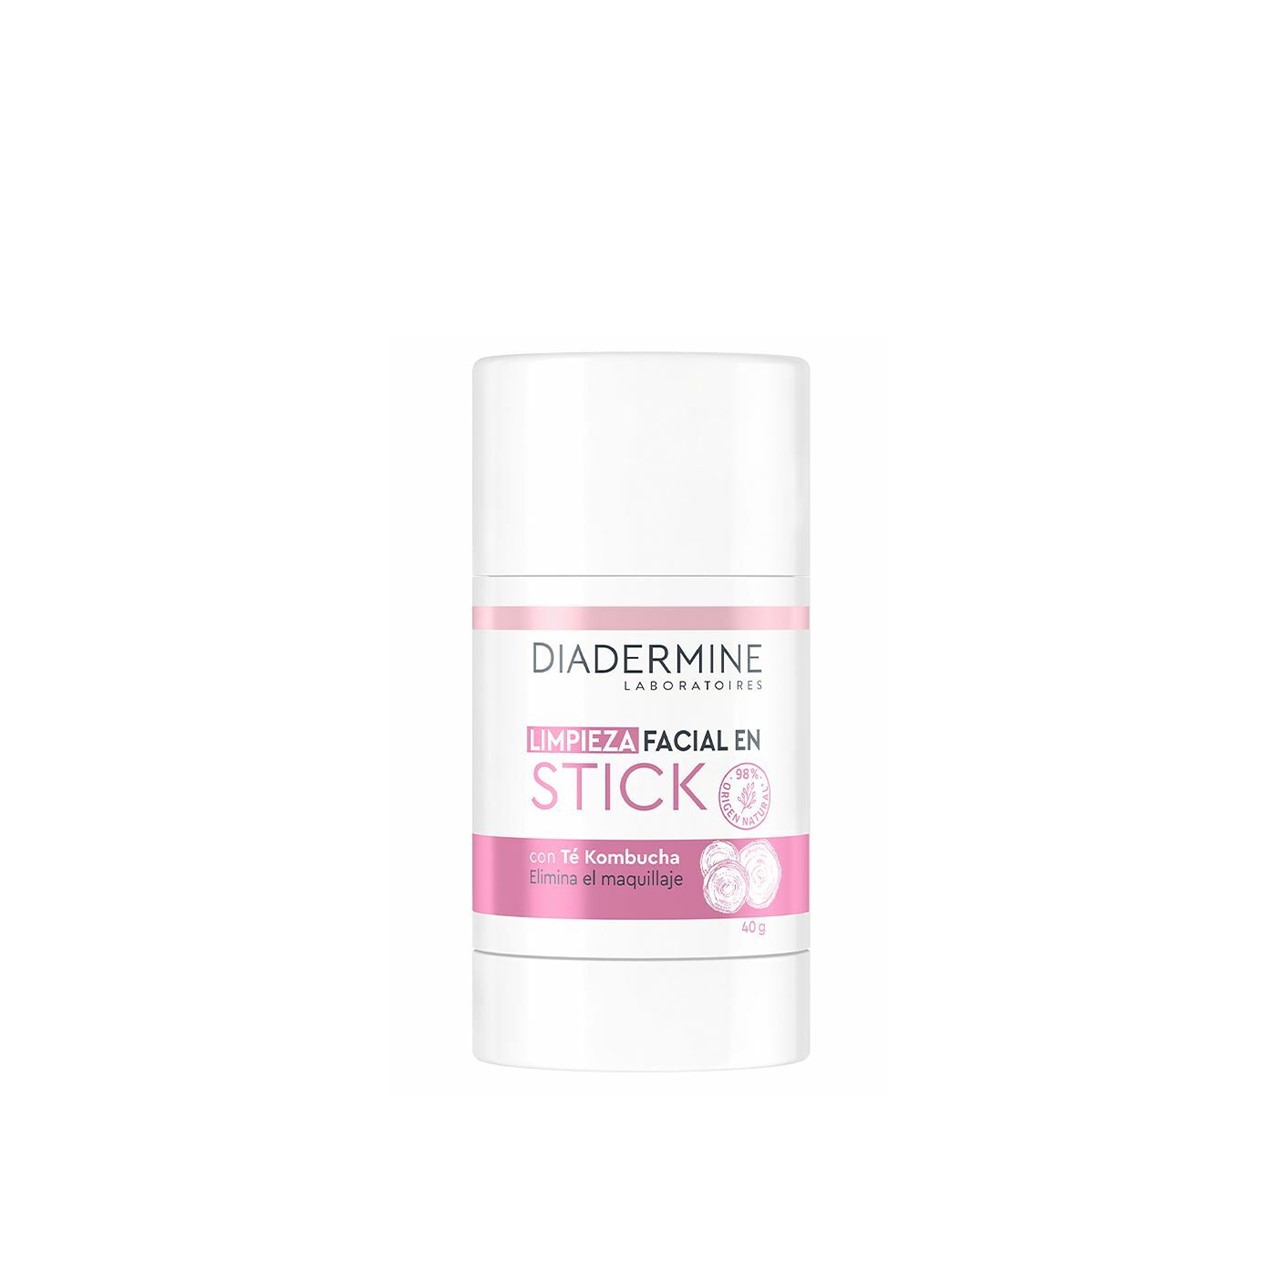 Diadermine Beauty Cleansing Stick 40g (1.41 oz)